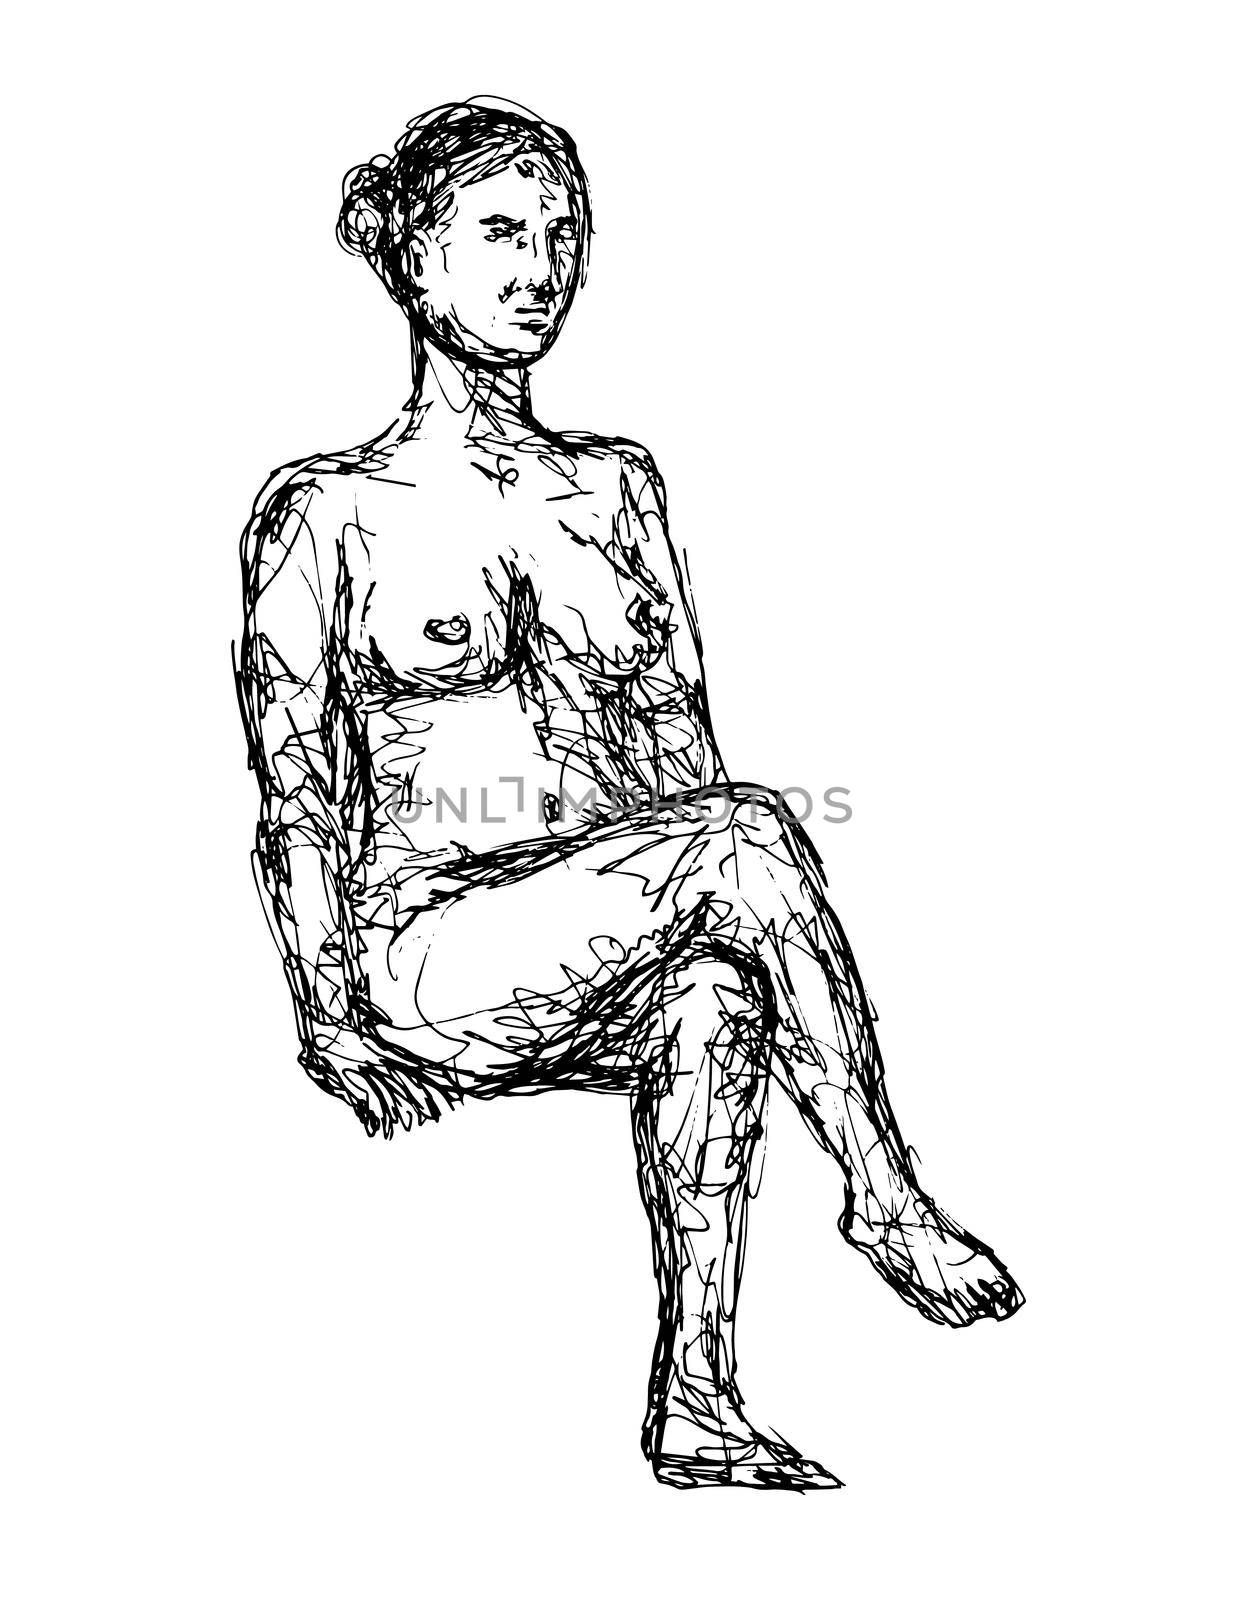 Nude Female Human Figure Sitting Down Front View Doodle Art Continuous Line Drawing  by patrimonio